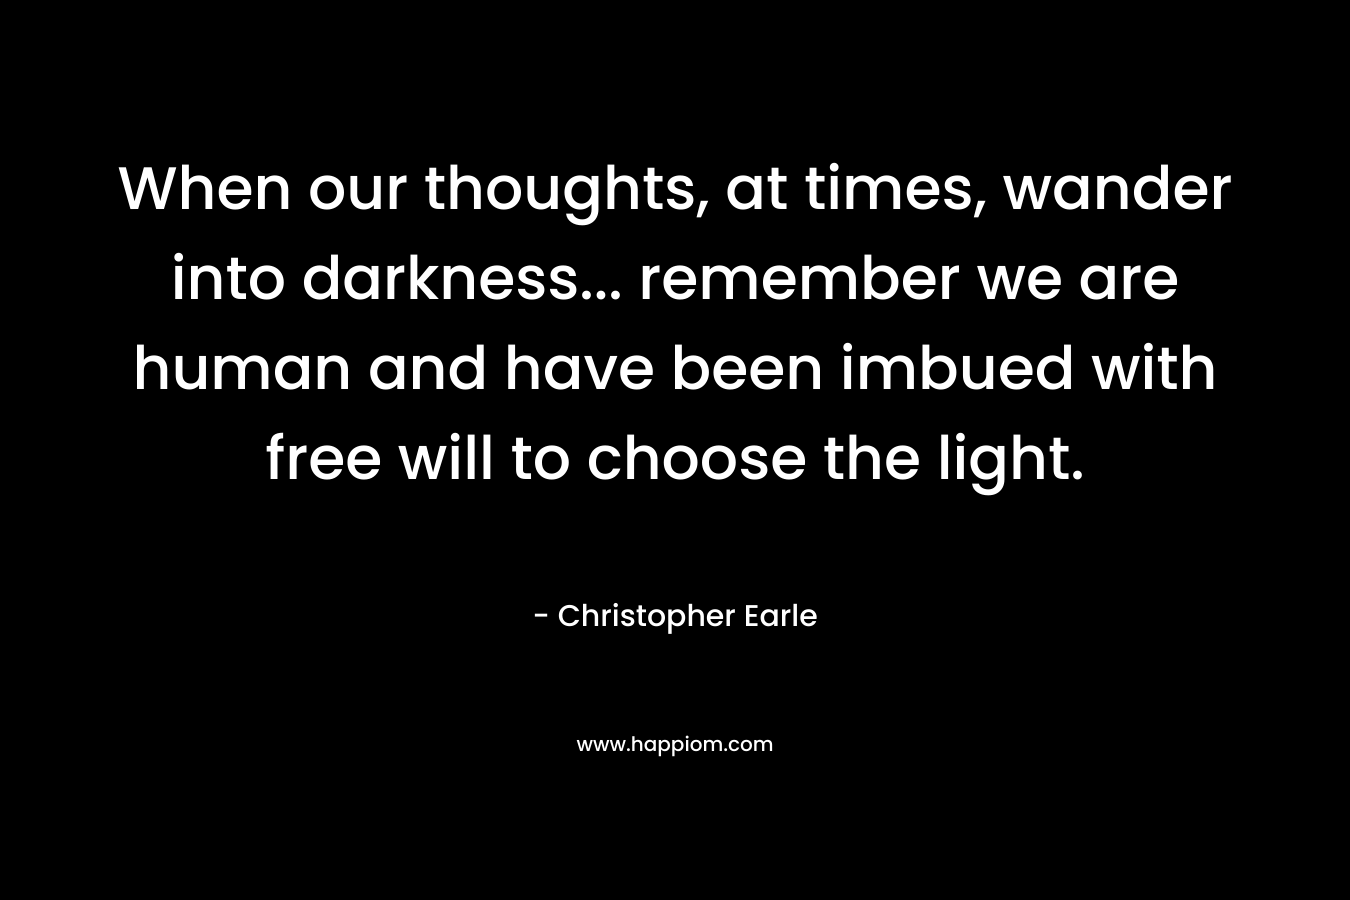 When our thoughts, at times, wander into darkness… remember we are human and have been imbued with free will to choose the light. – Christopher Earle